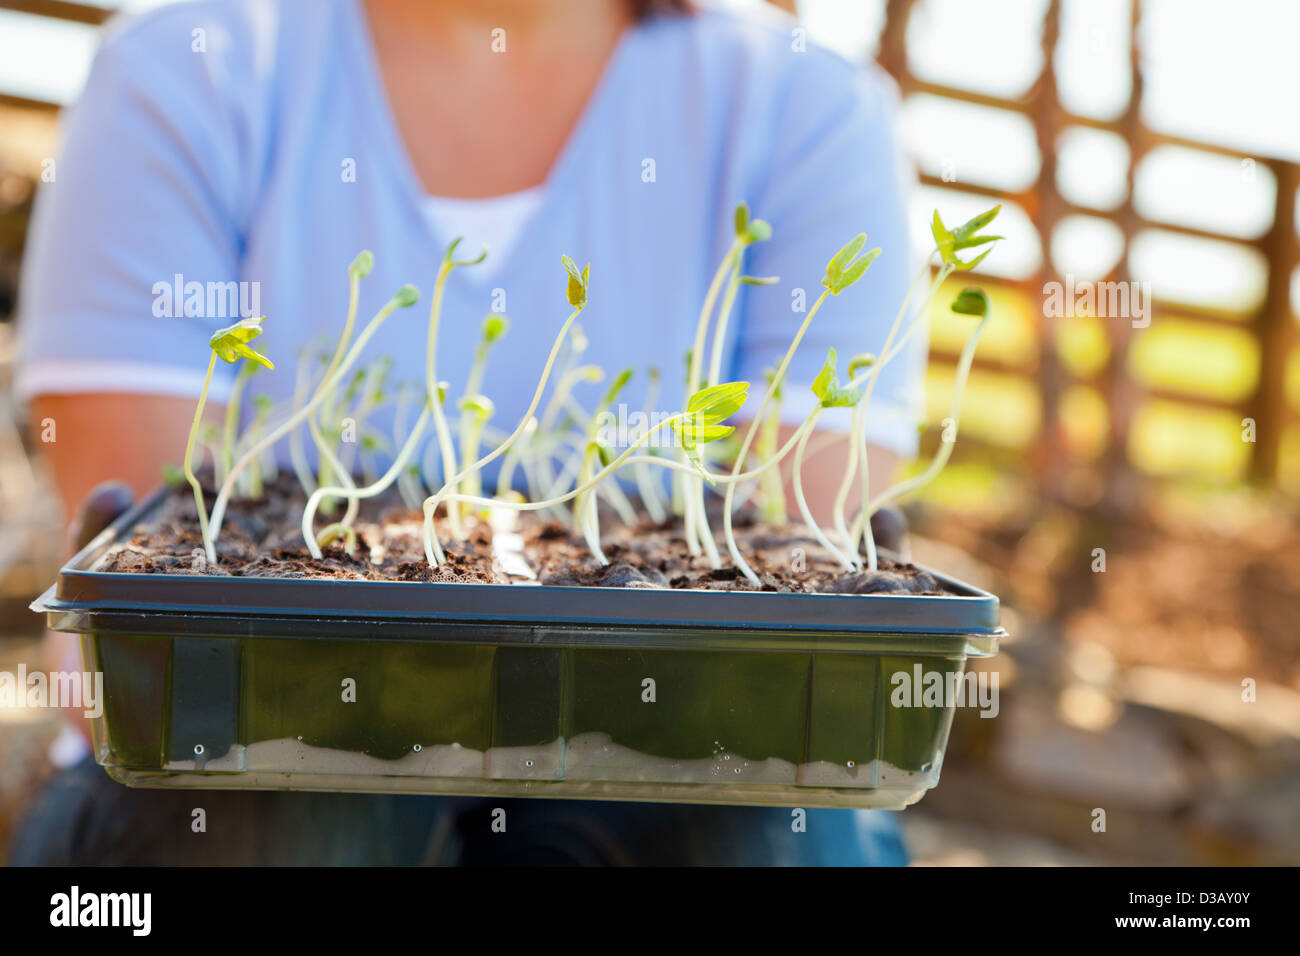 Closeup of a person holding tray with seedlings Stock Photo